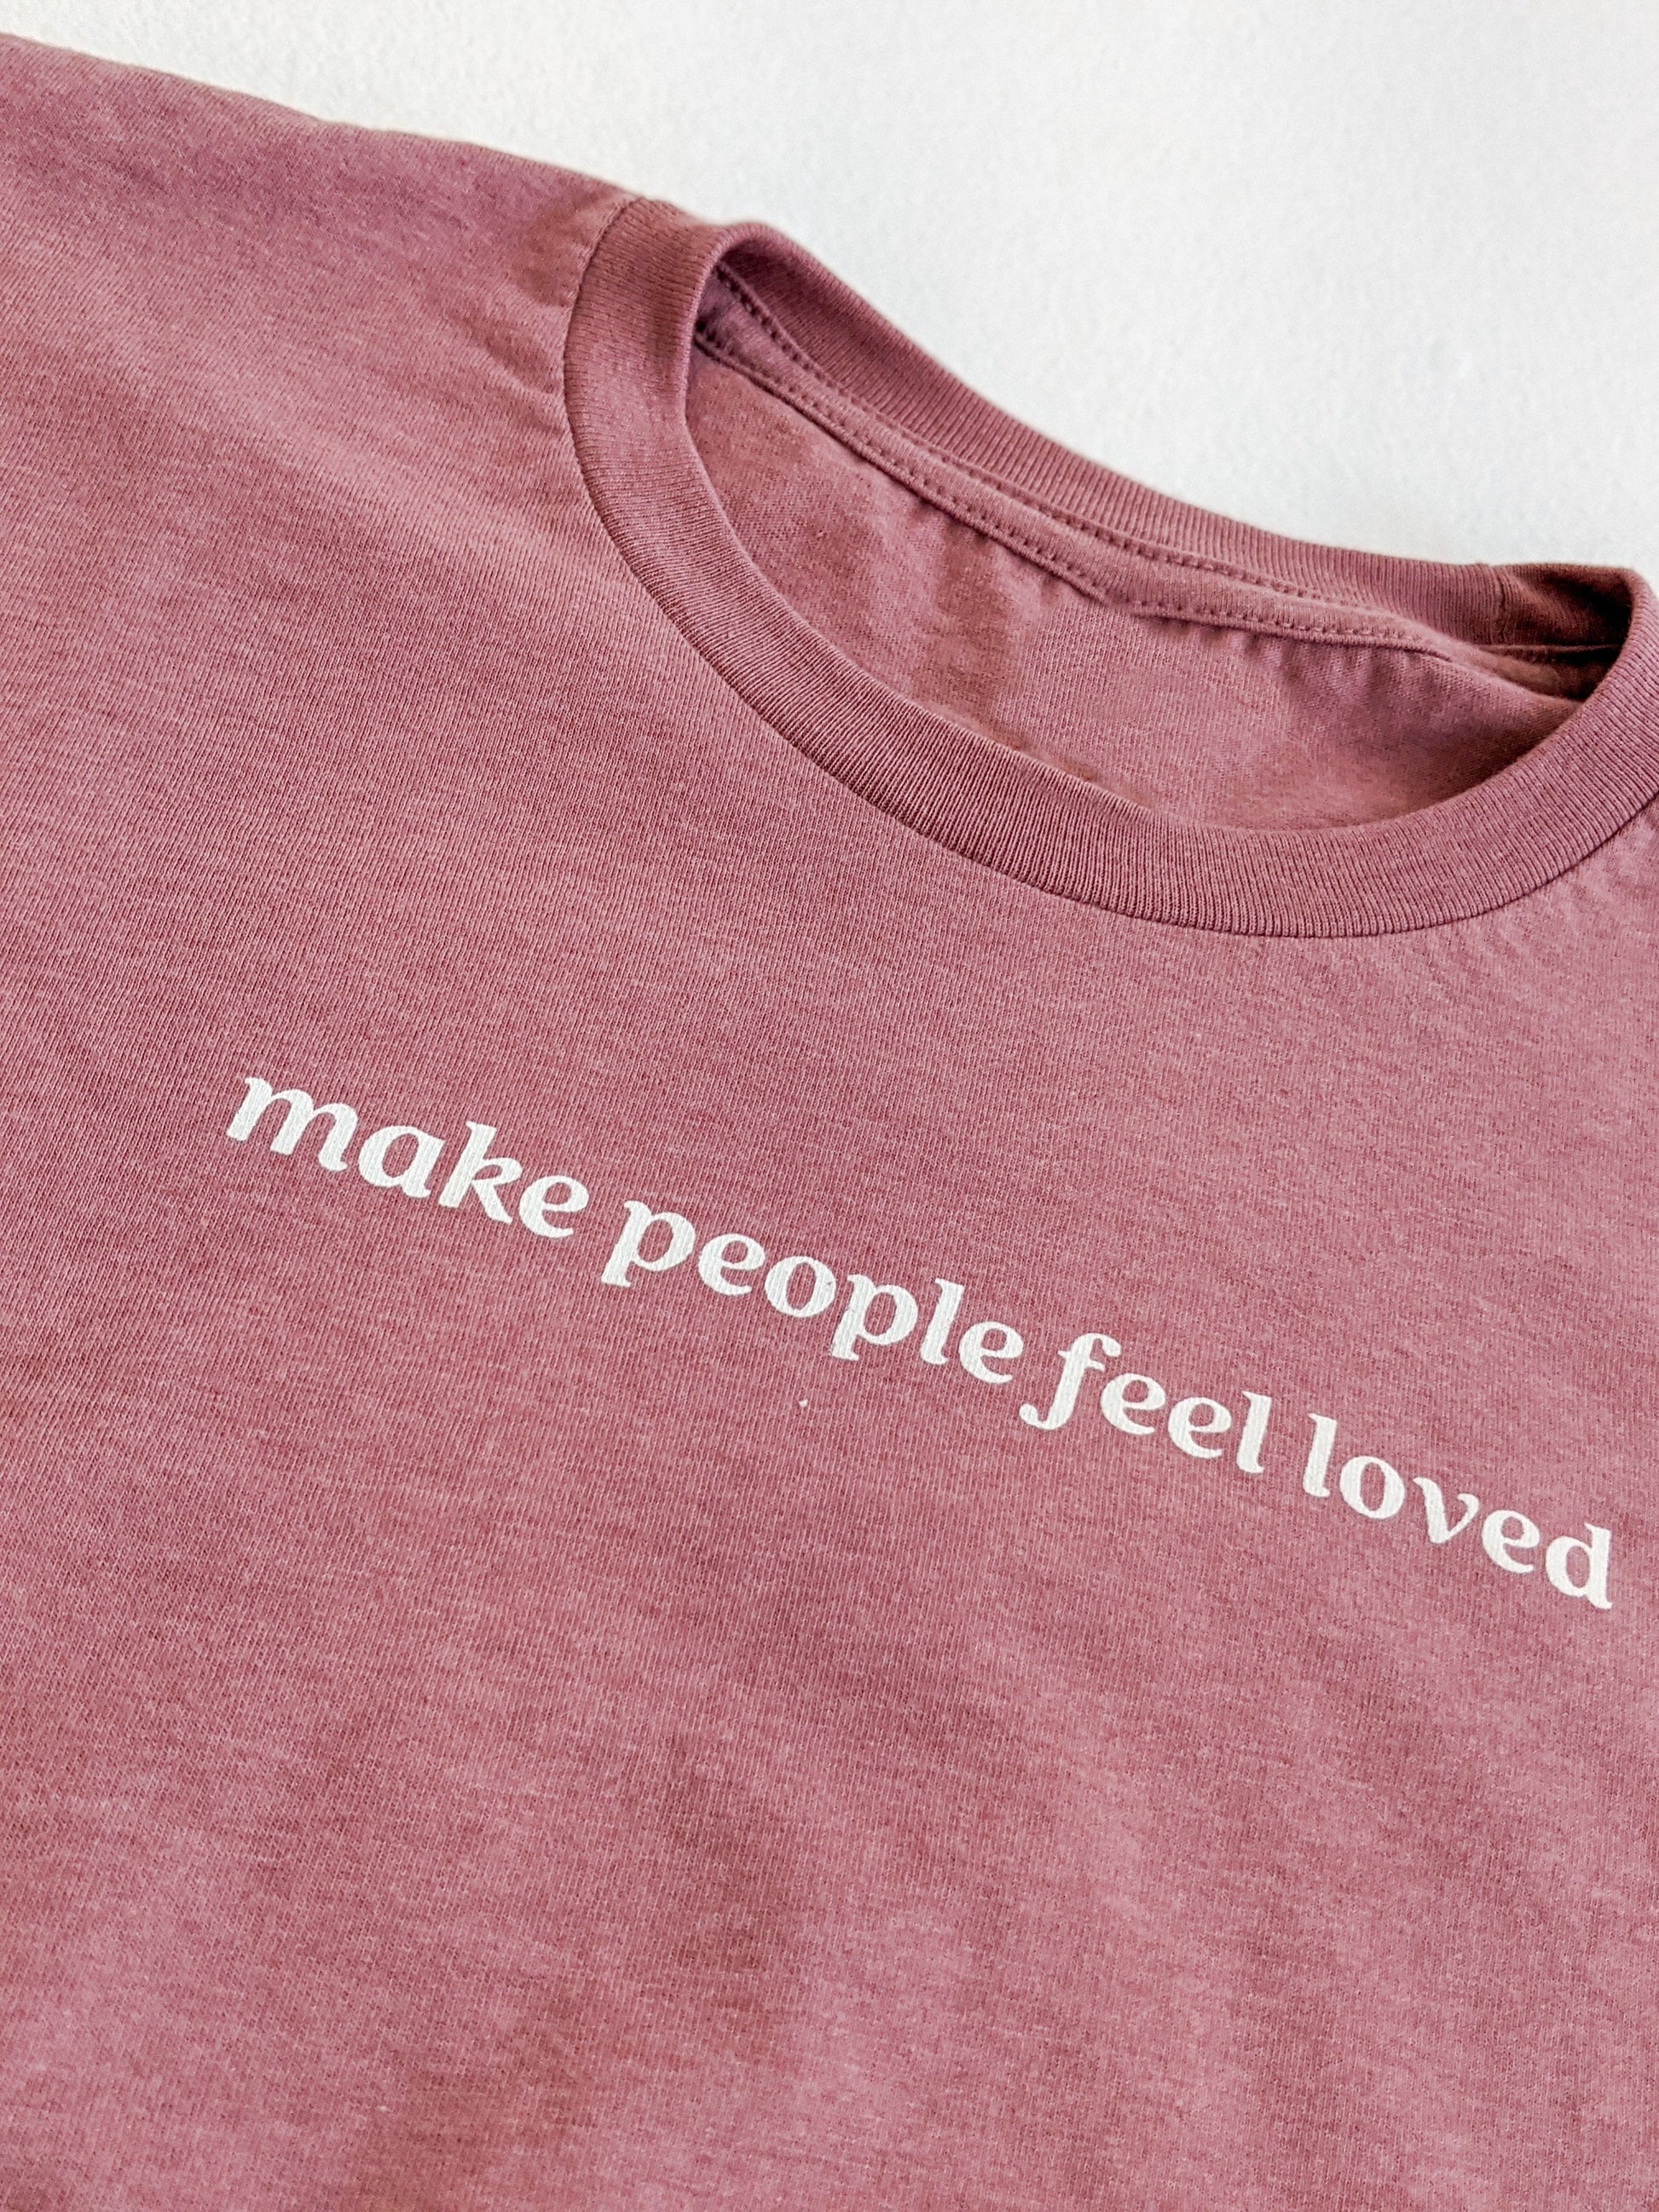 Make People Feel Loved Tee,Tops,CASUAL, GRAPHIC TEE, GRAPHIC TEES, SHORT SLEEVE, T-SHIRT, UNISEX- DEFIANT